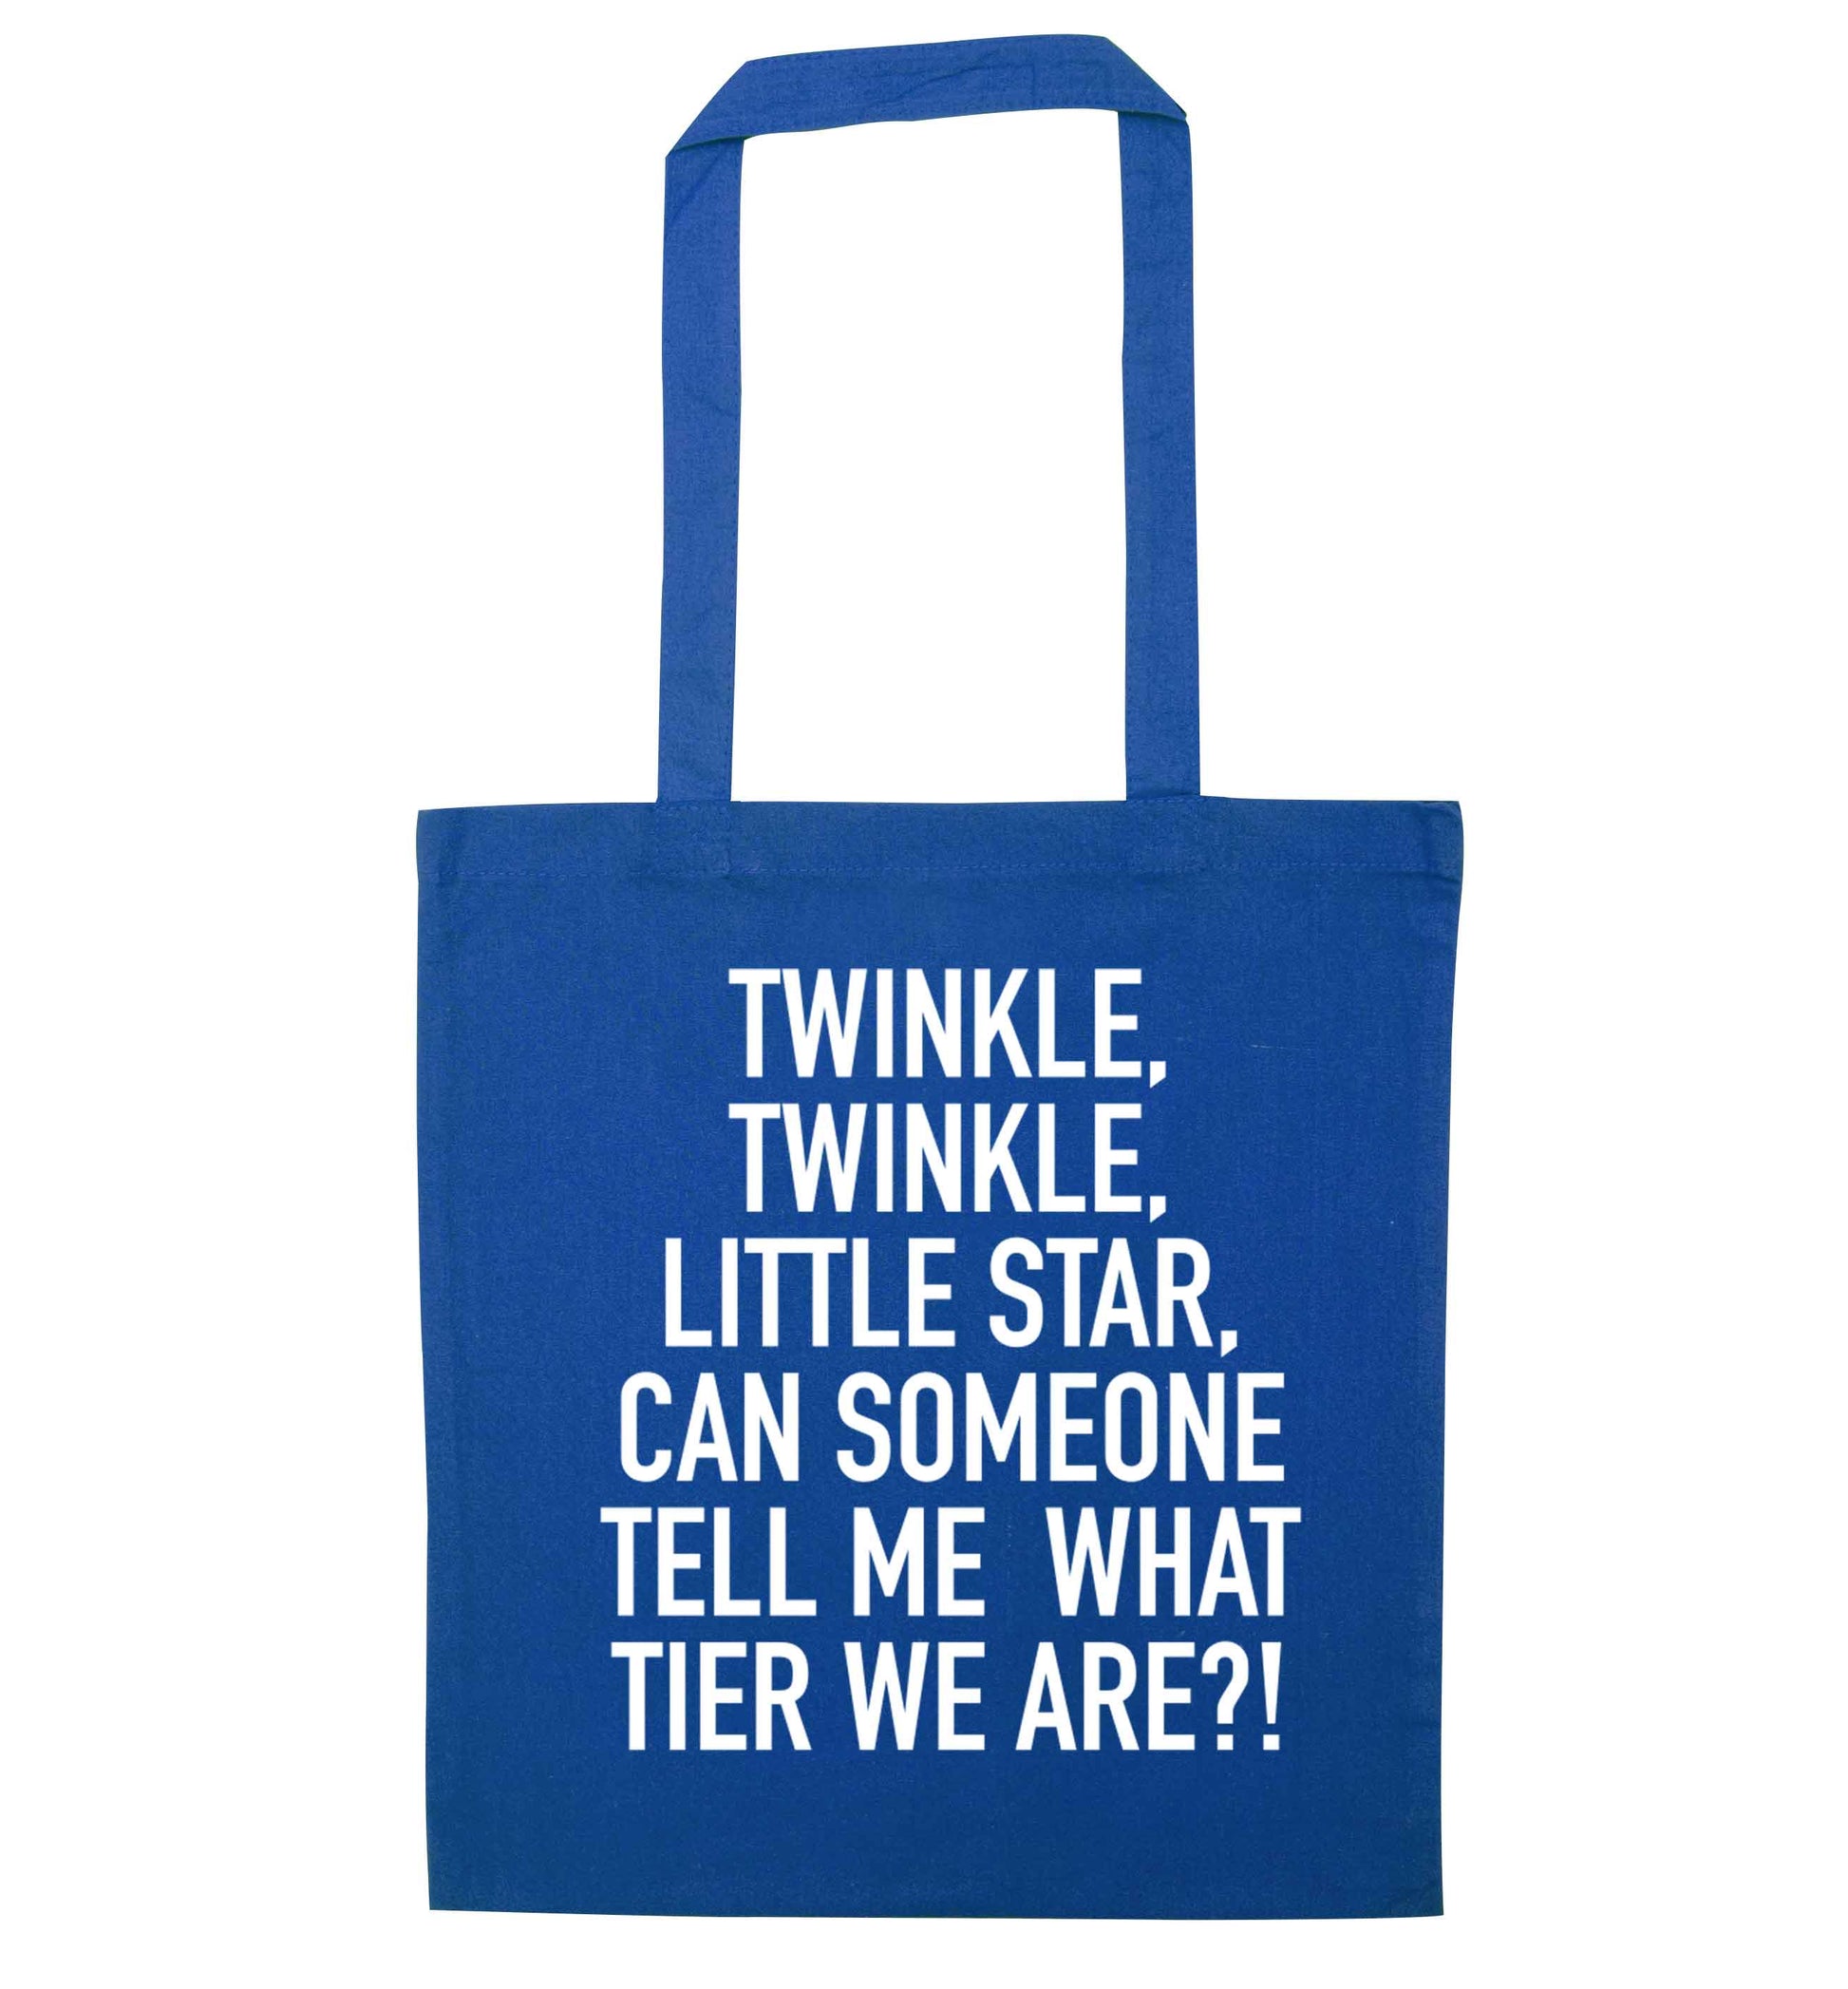 Twinkle twinkle, little star does anyone know what tier we are? blue tote bag